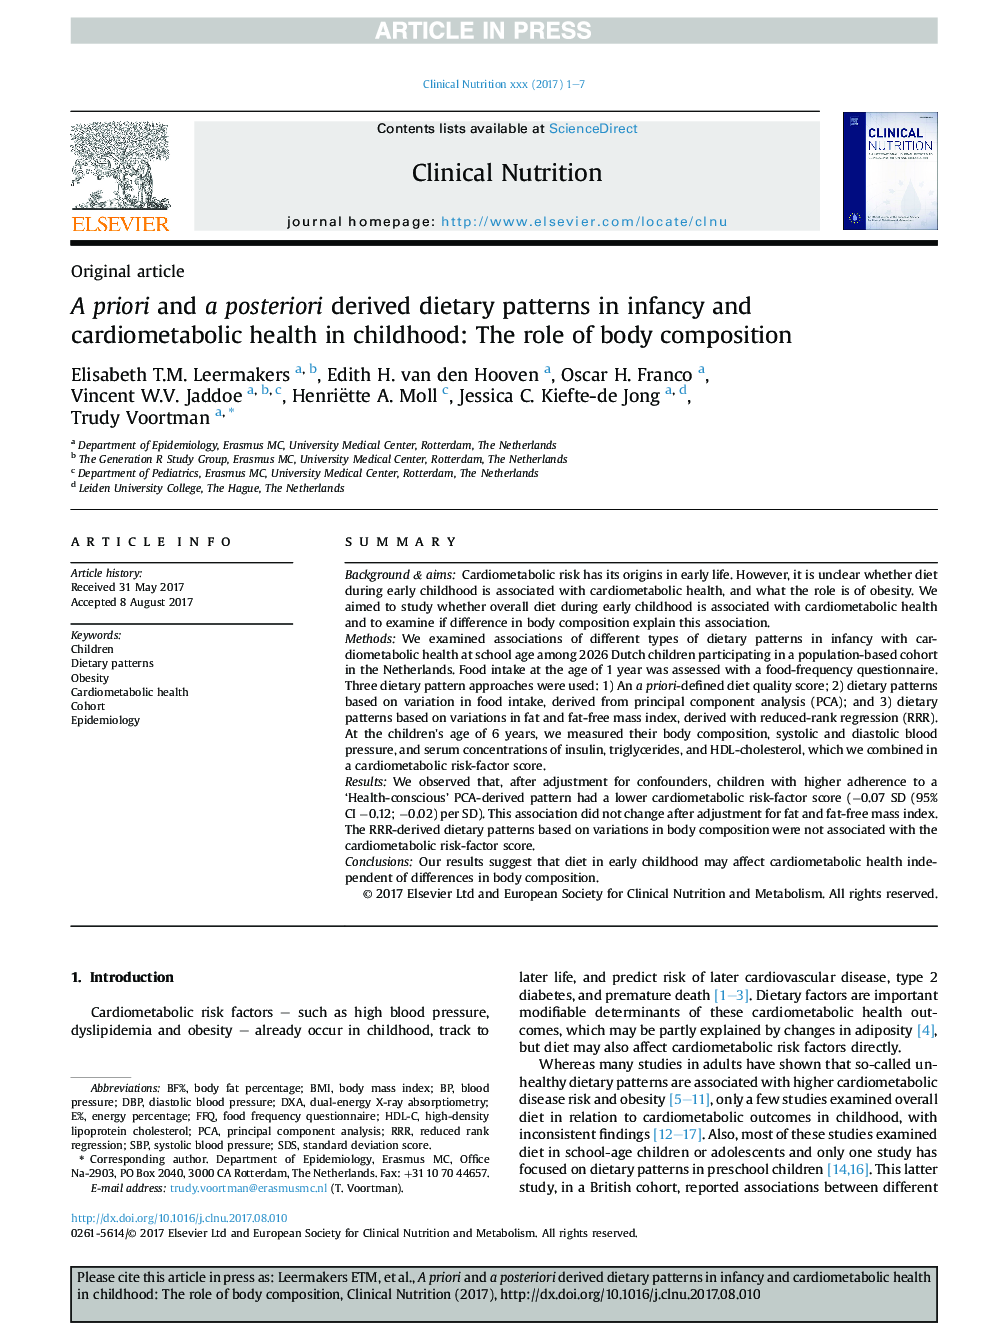 A priori and a posteriori derived dietary patterns in infancy and cardiometabolic health in childhood: The role of body composition